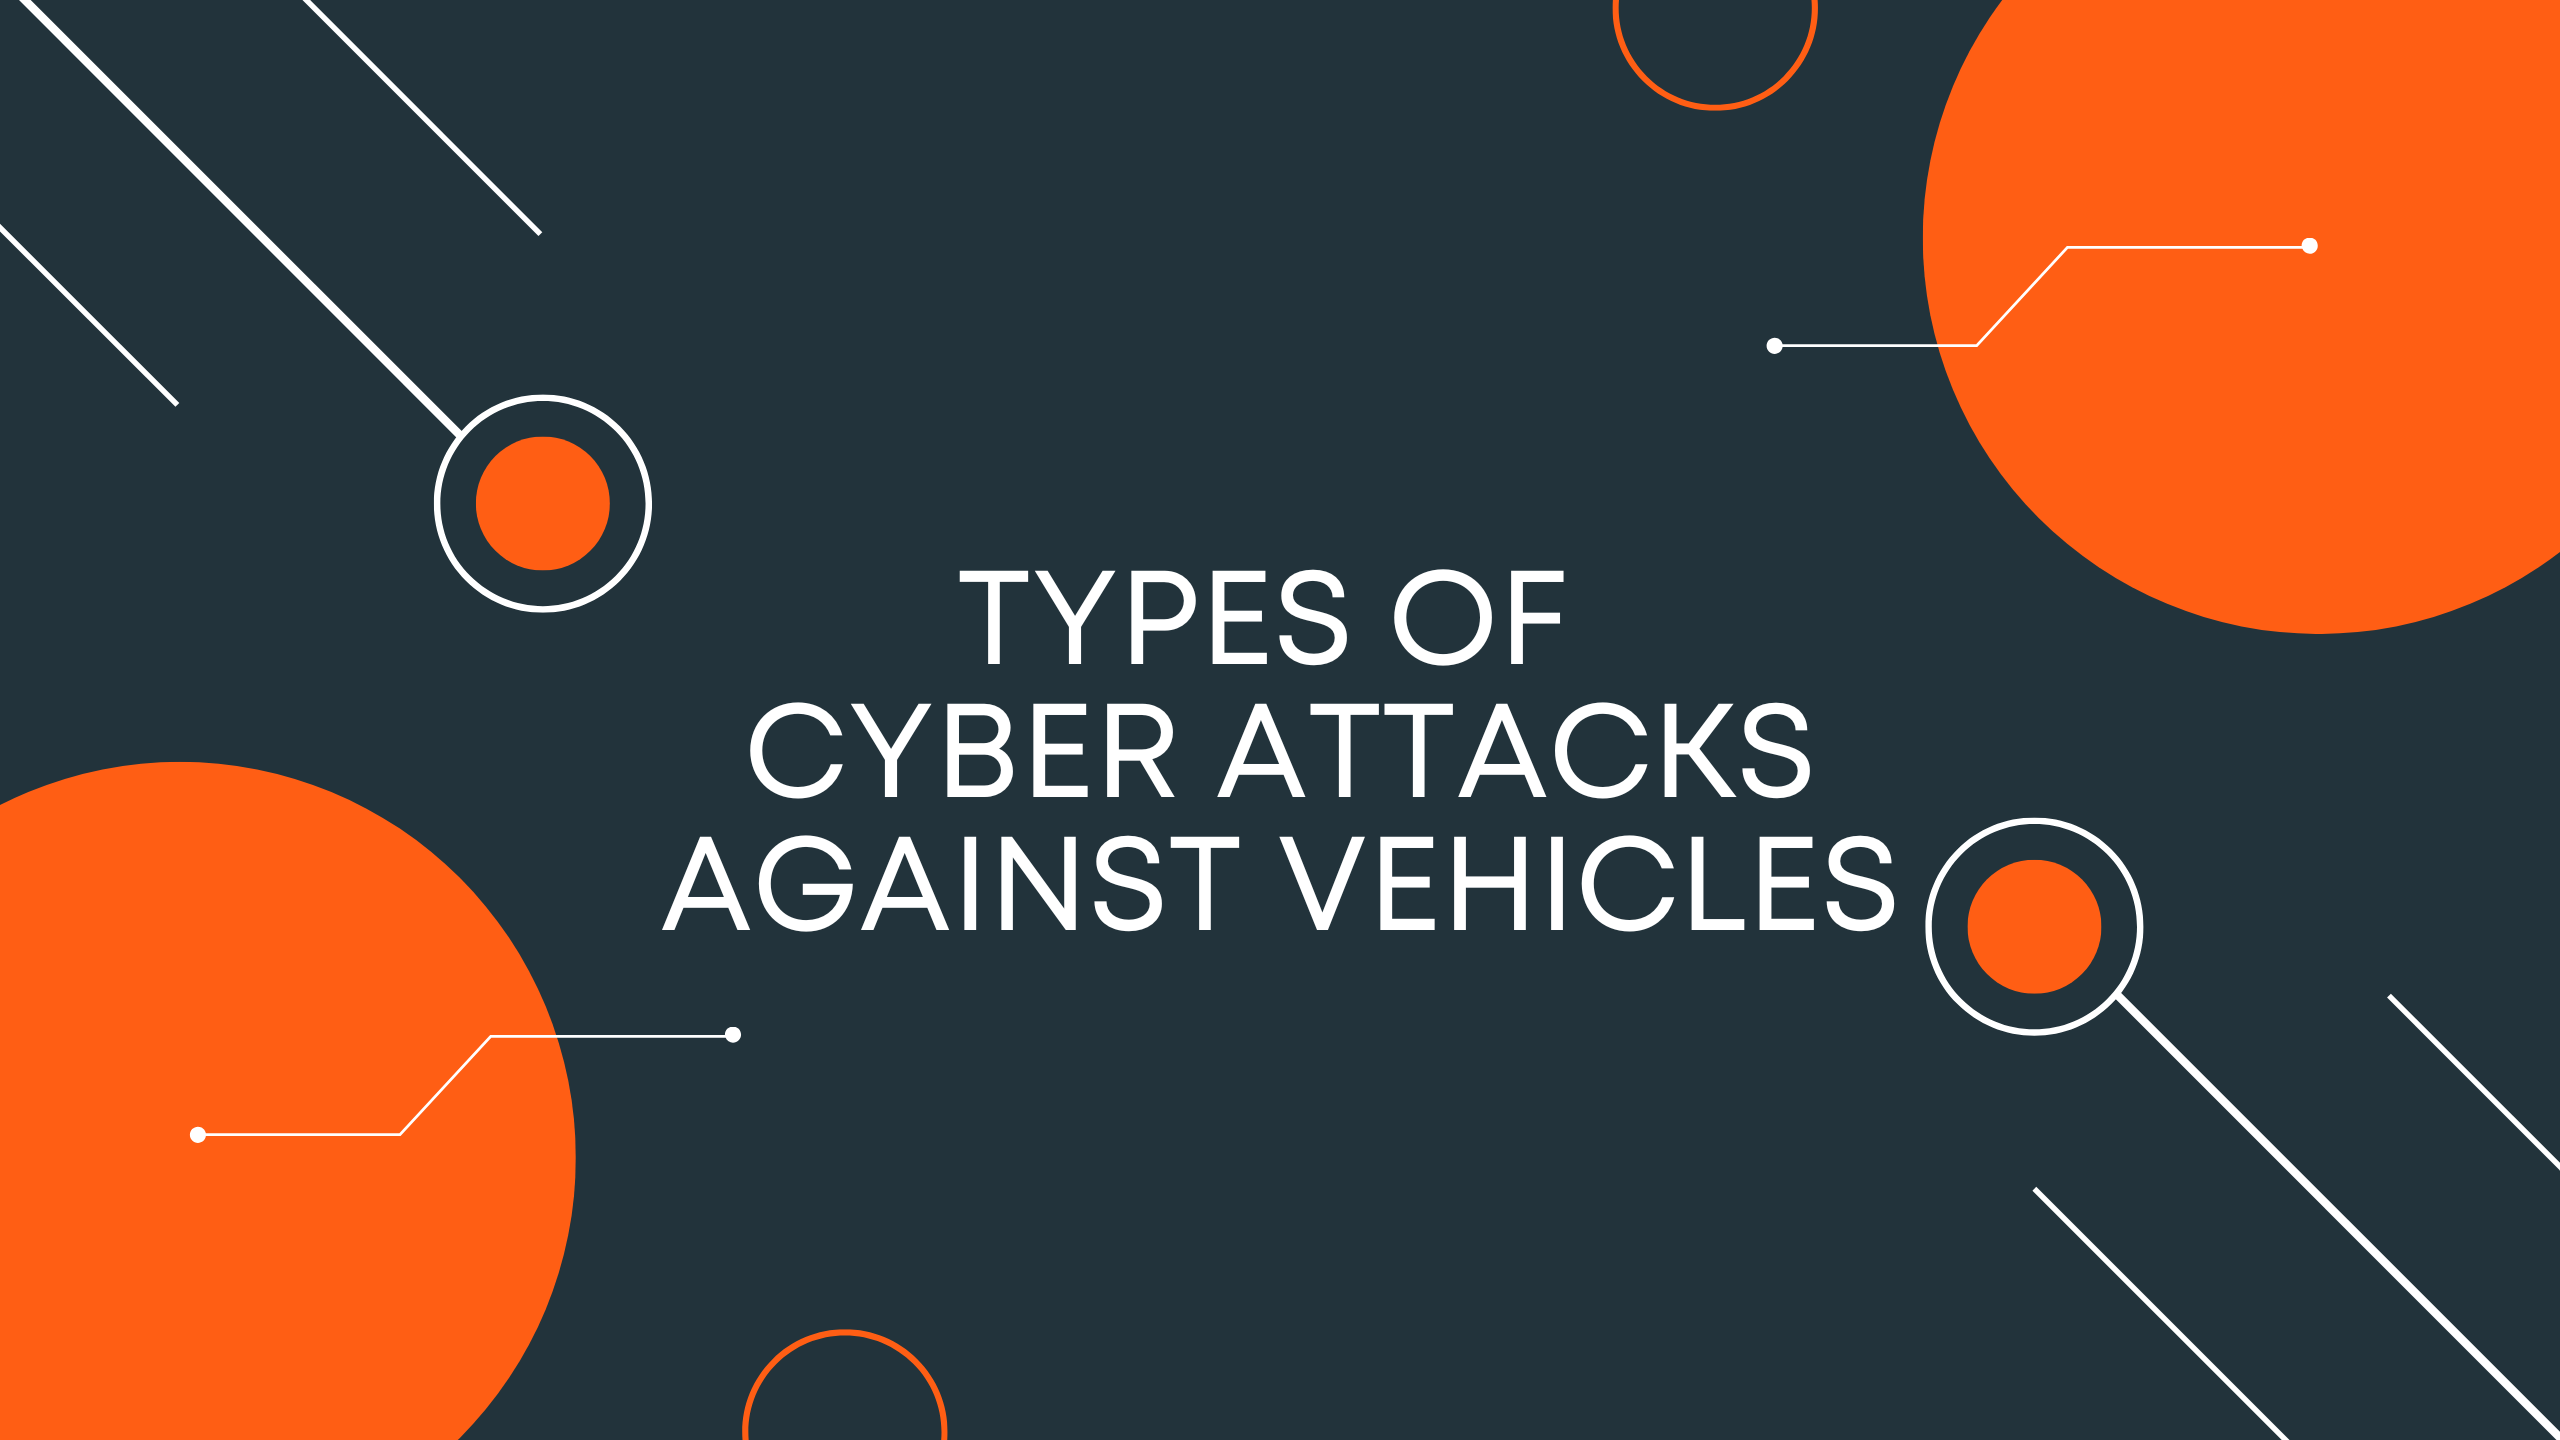 Types of Cyber Attacks Against Vehicles